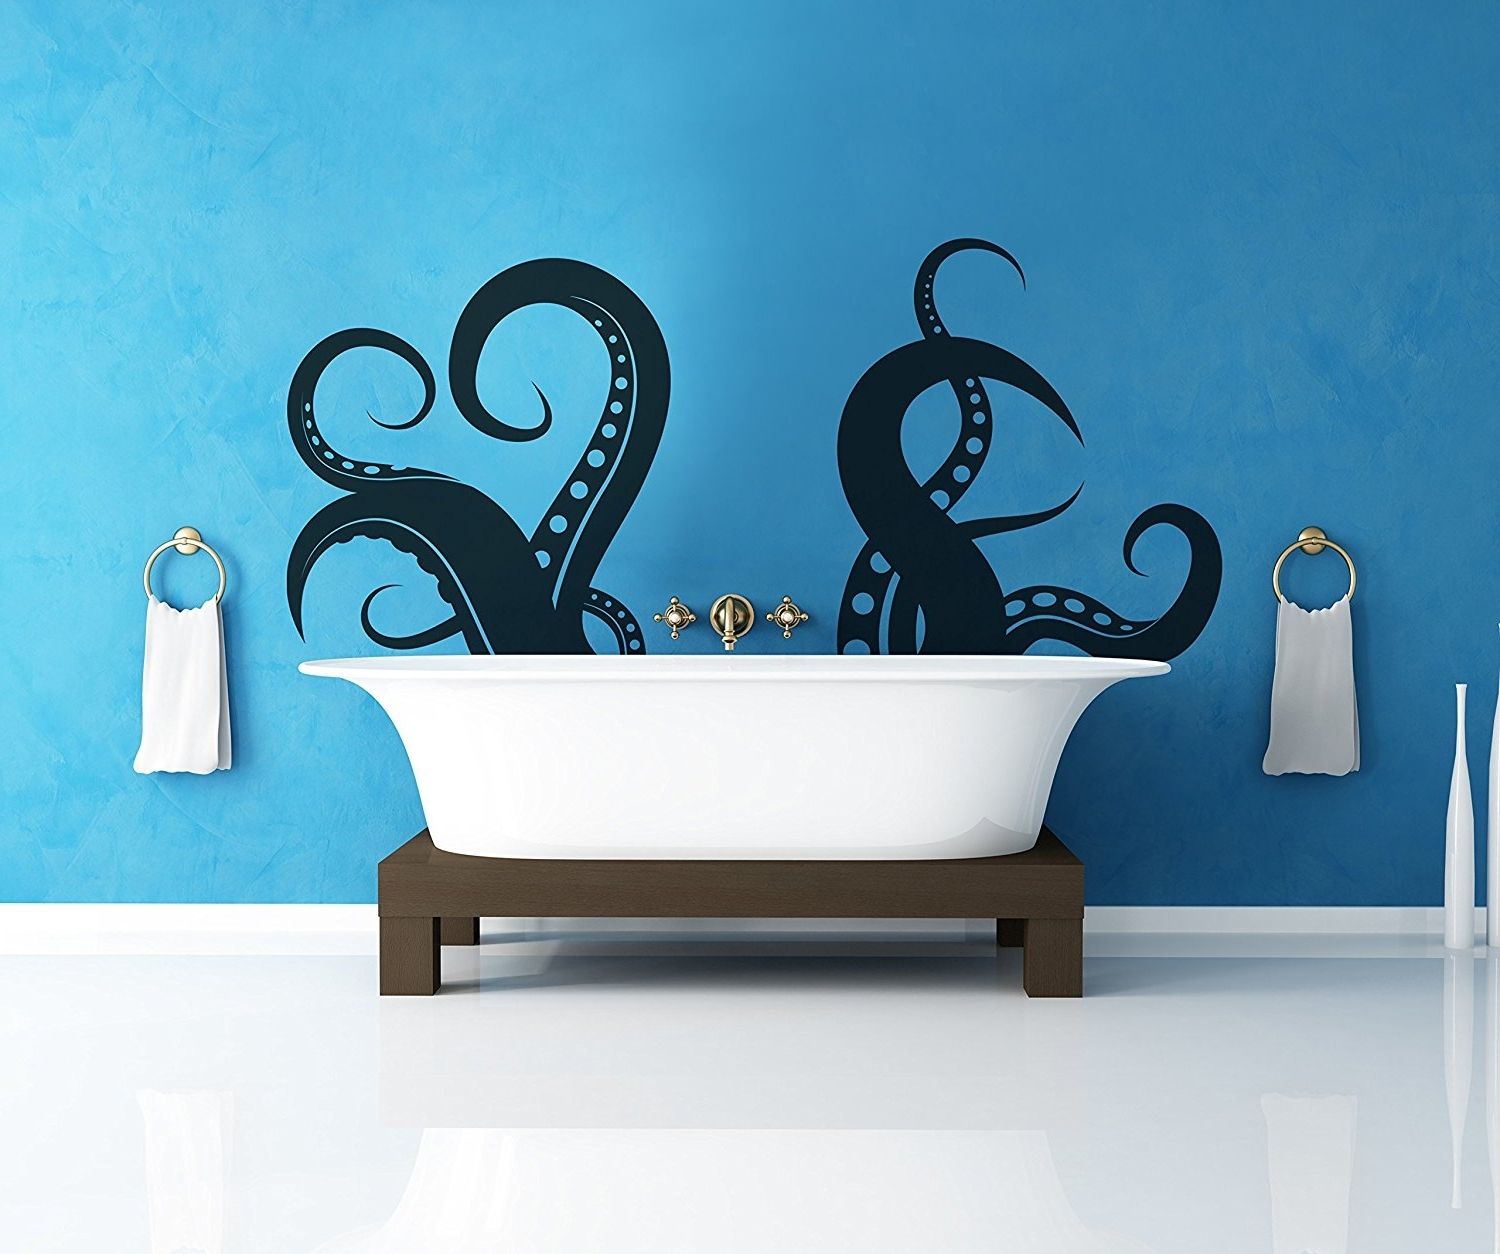 Octopus Tentacle Wall Art Within Preferred Amazon: Stickerbrand Animals Vinyl Wall Art Giant Octopus (View 14 of 15)